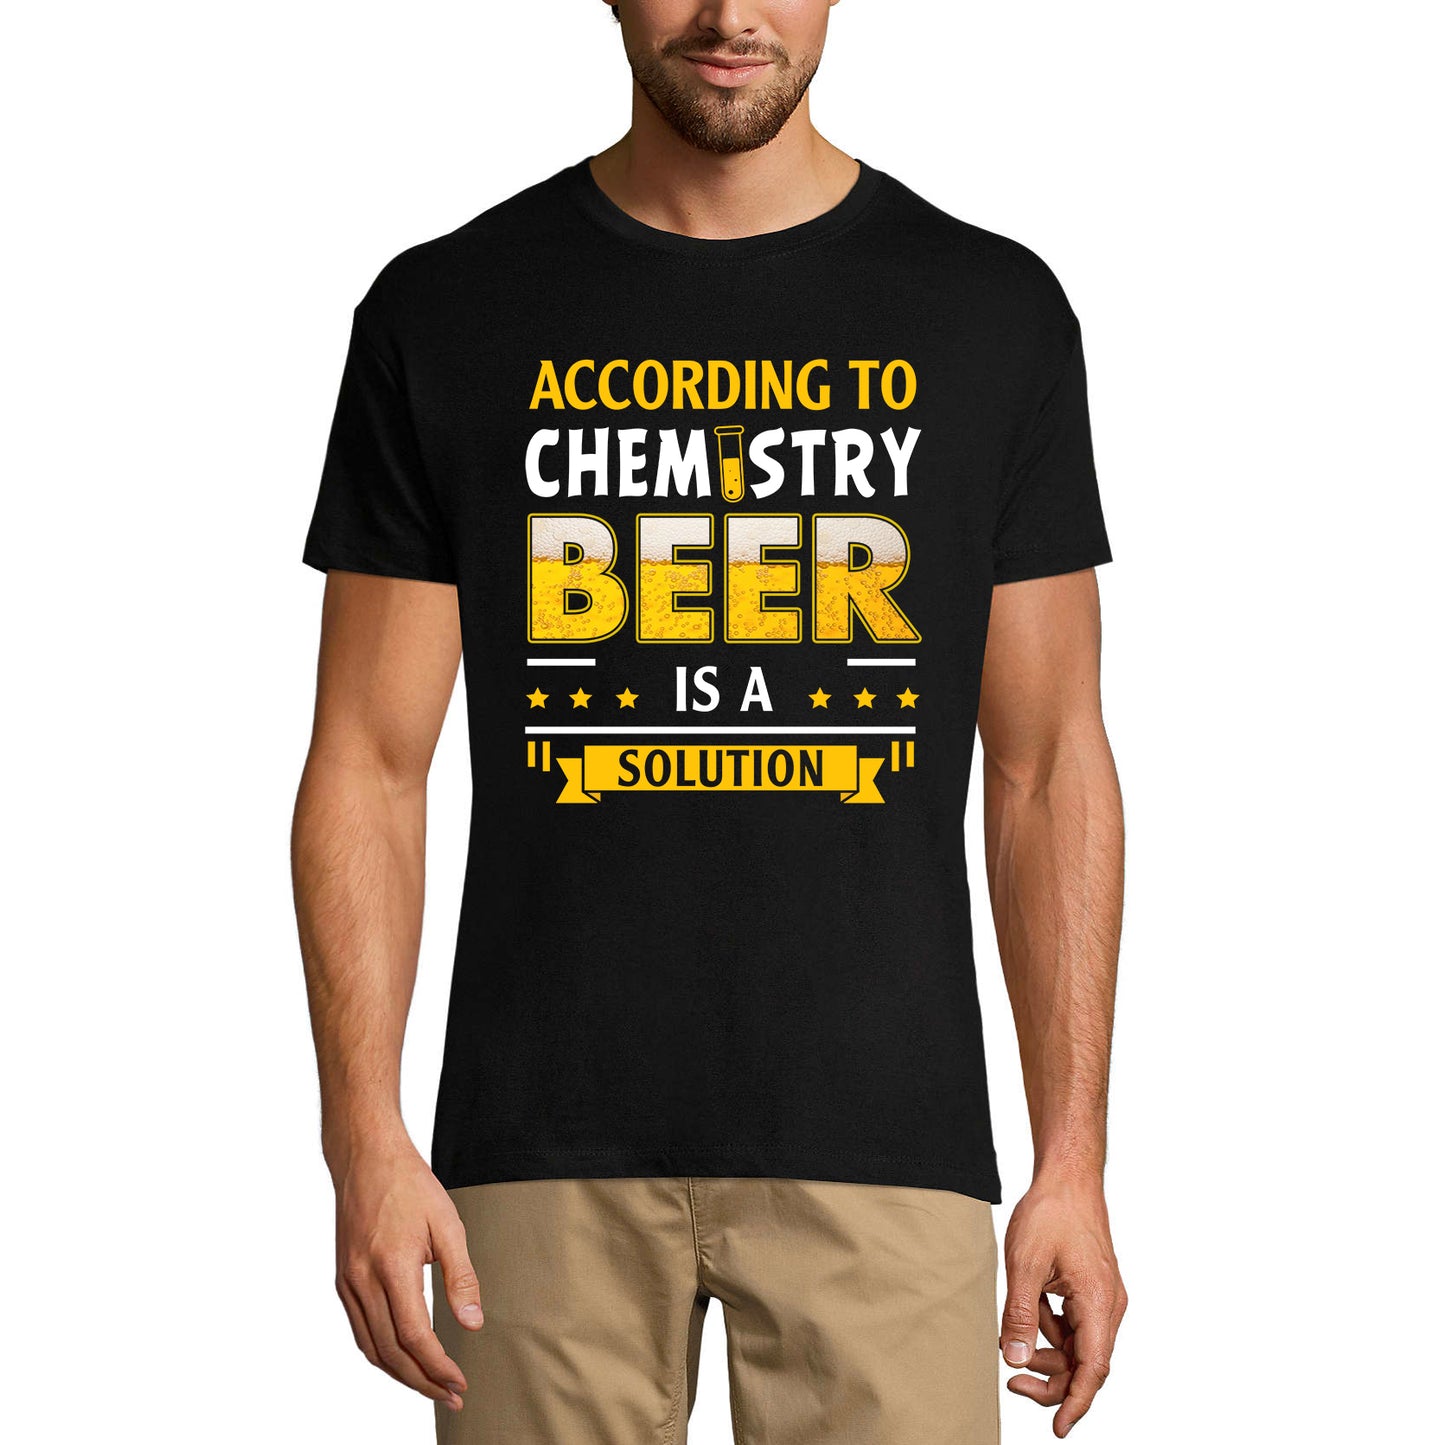 ULTRABASIC Men's T-Shirt According to Chemistry Beer is a Solution - Beer Lover Tee Shirt